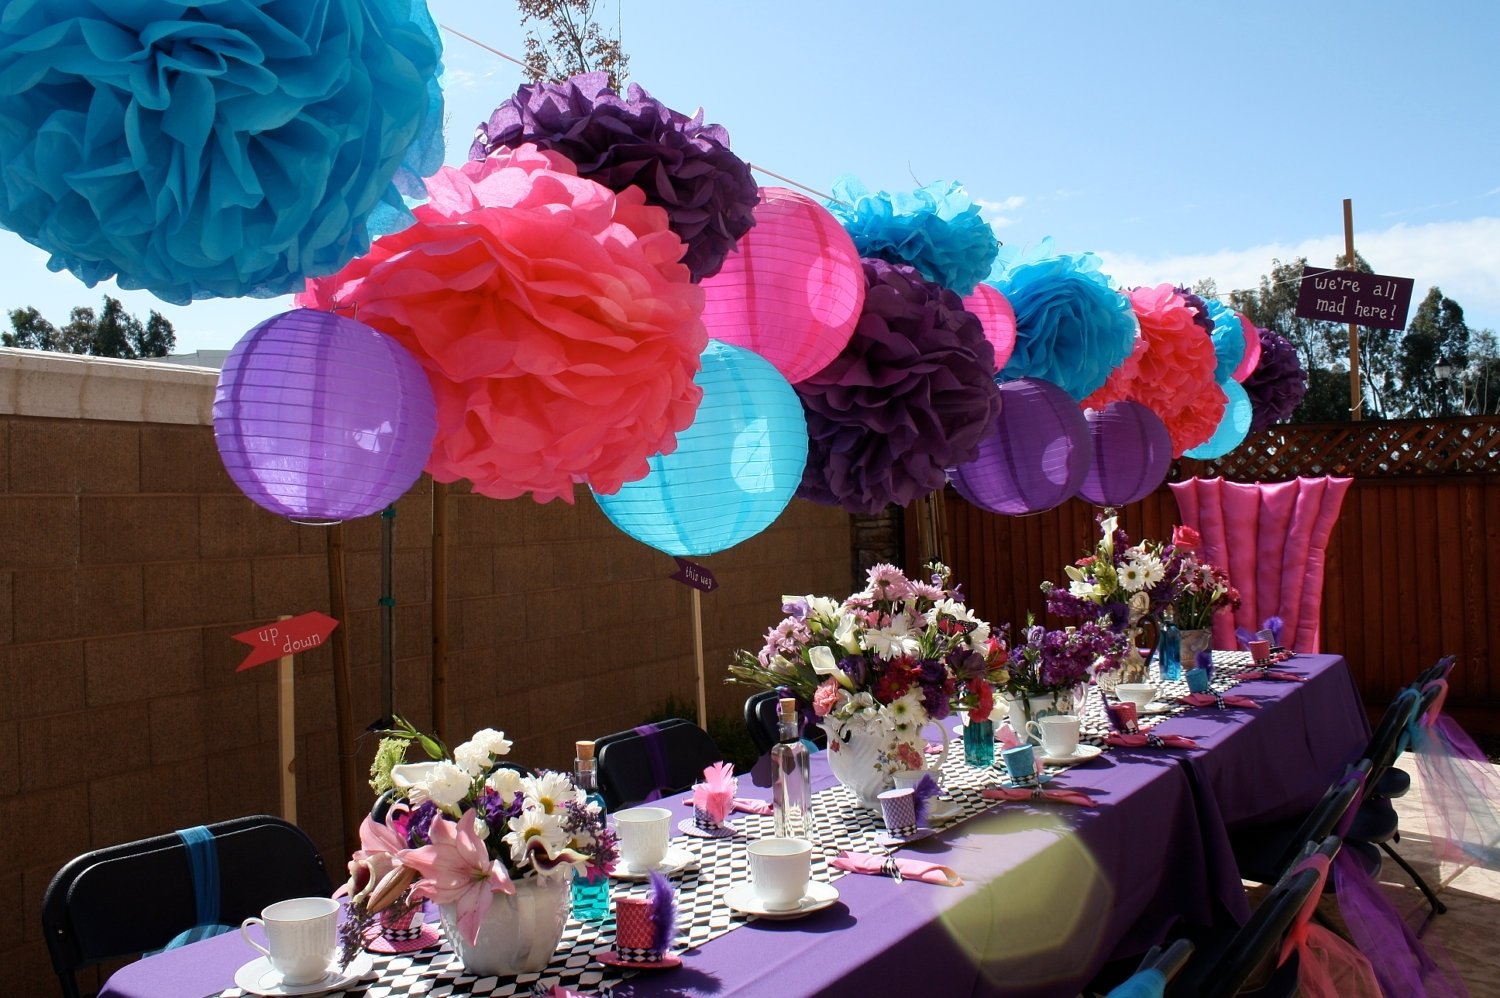 10 Most Popular Mad Hatters Tea Party Ideas mad hatter tea party baby shower theme e280a2 baby showers ideas 2022